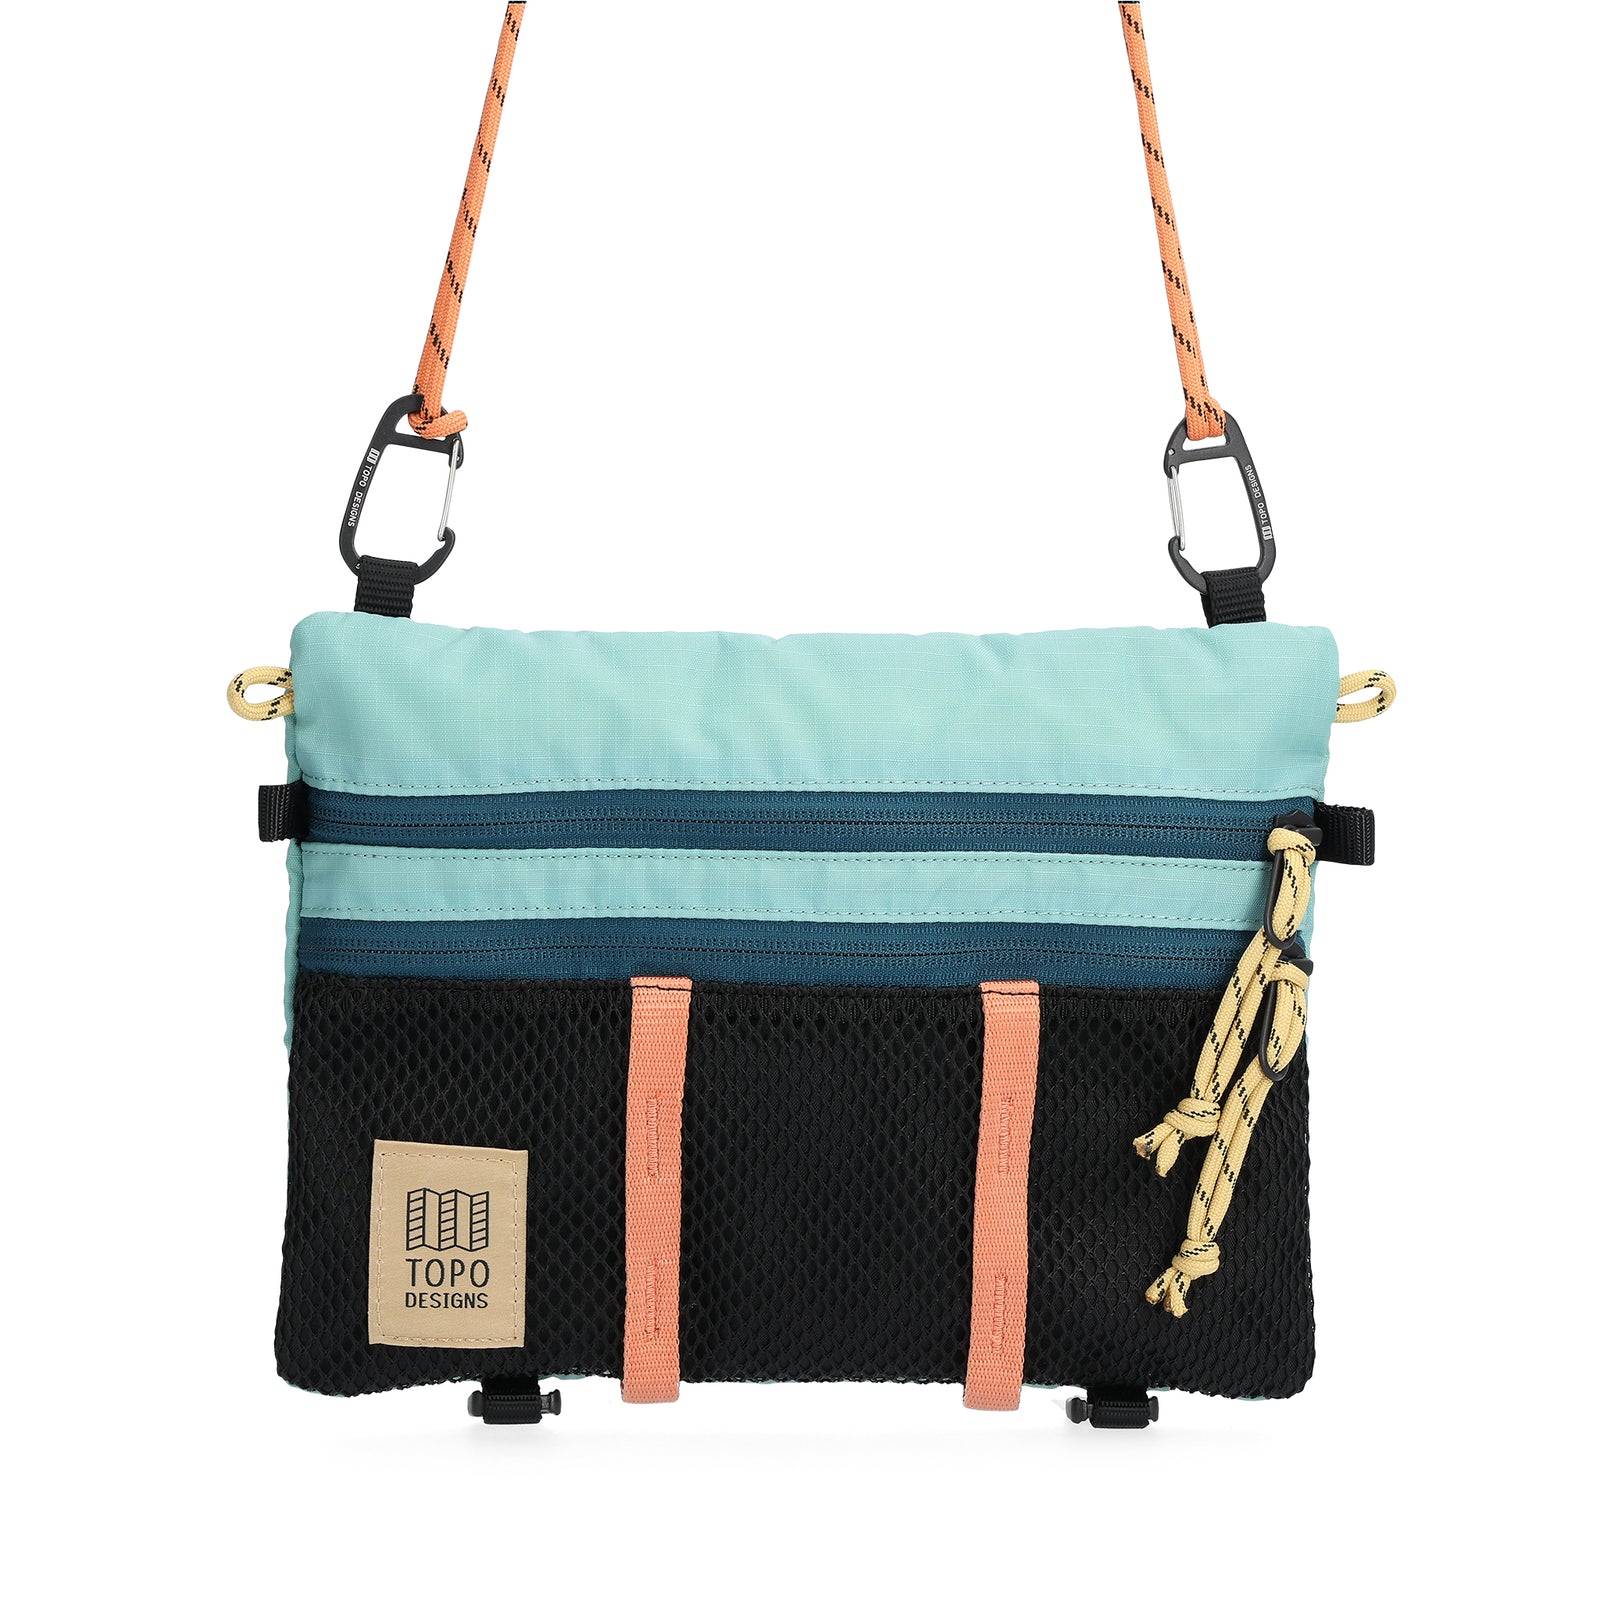 Front View of Topo Designs Mountain Accessory Shoulder Bag in "Geode Green / Black"